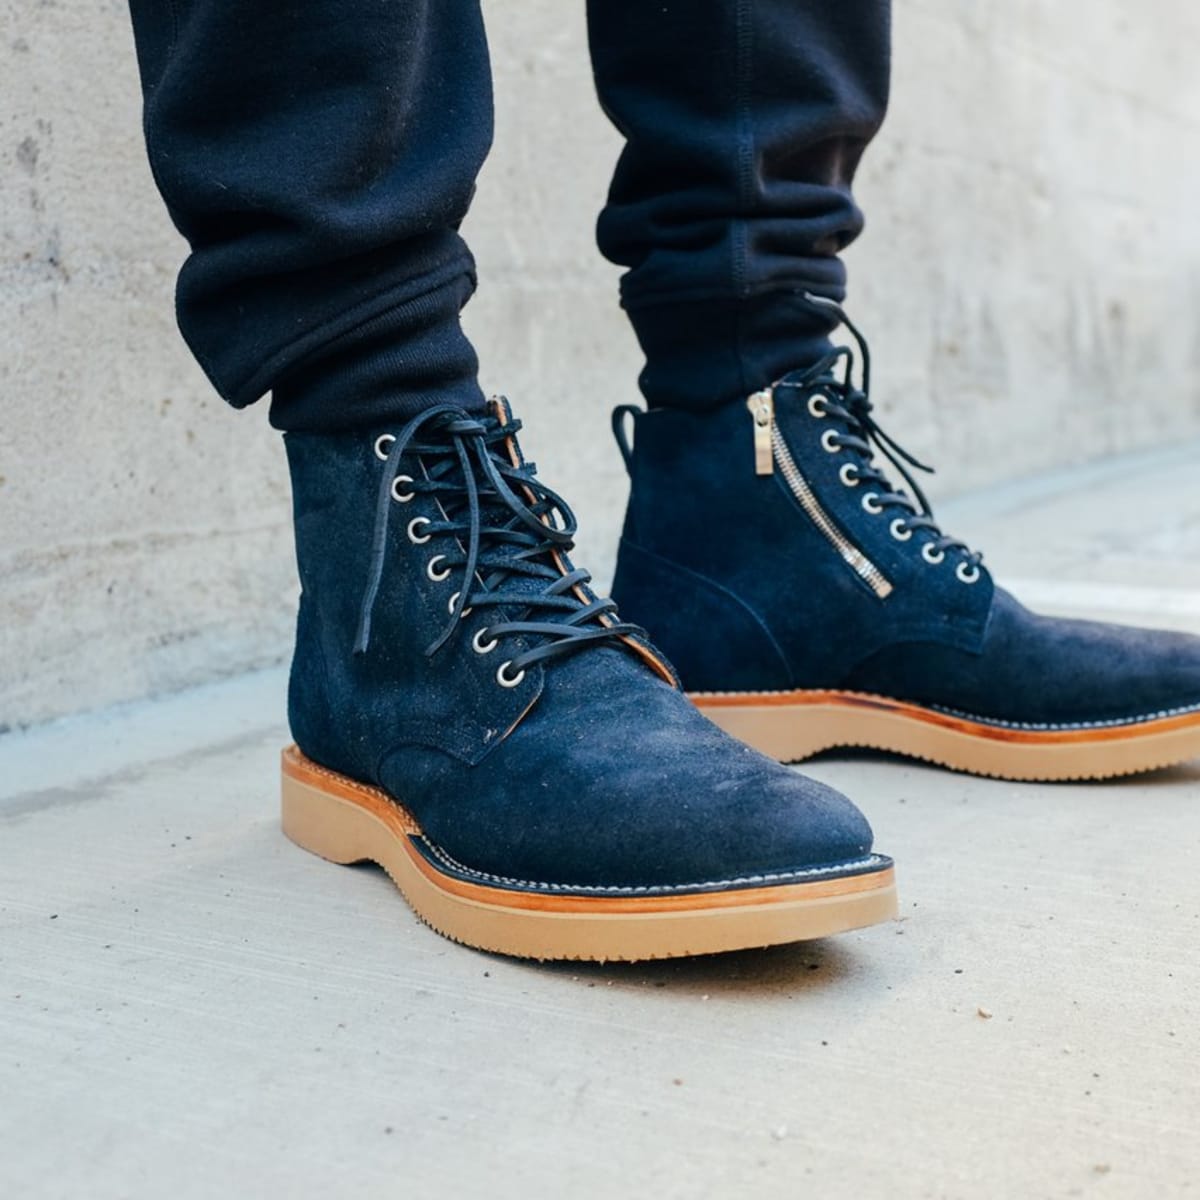 3sixteen releases its 15y Viberg 